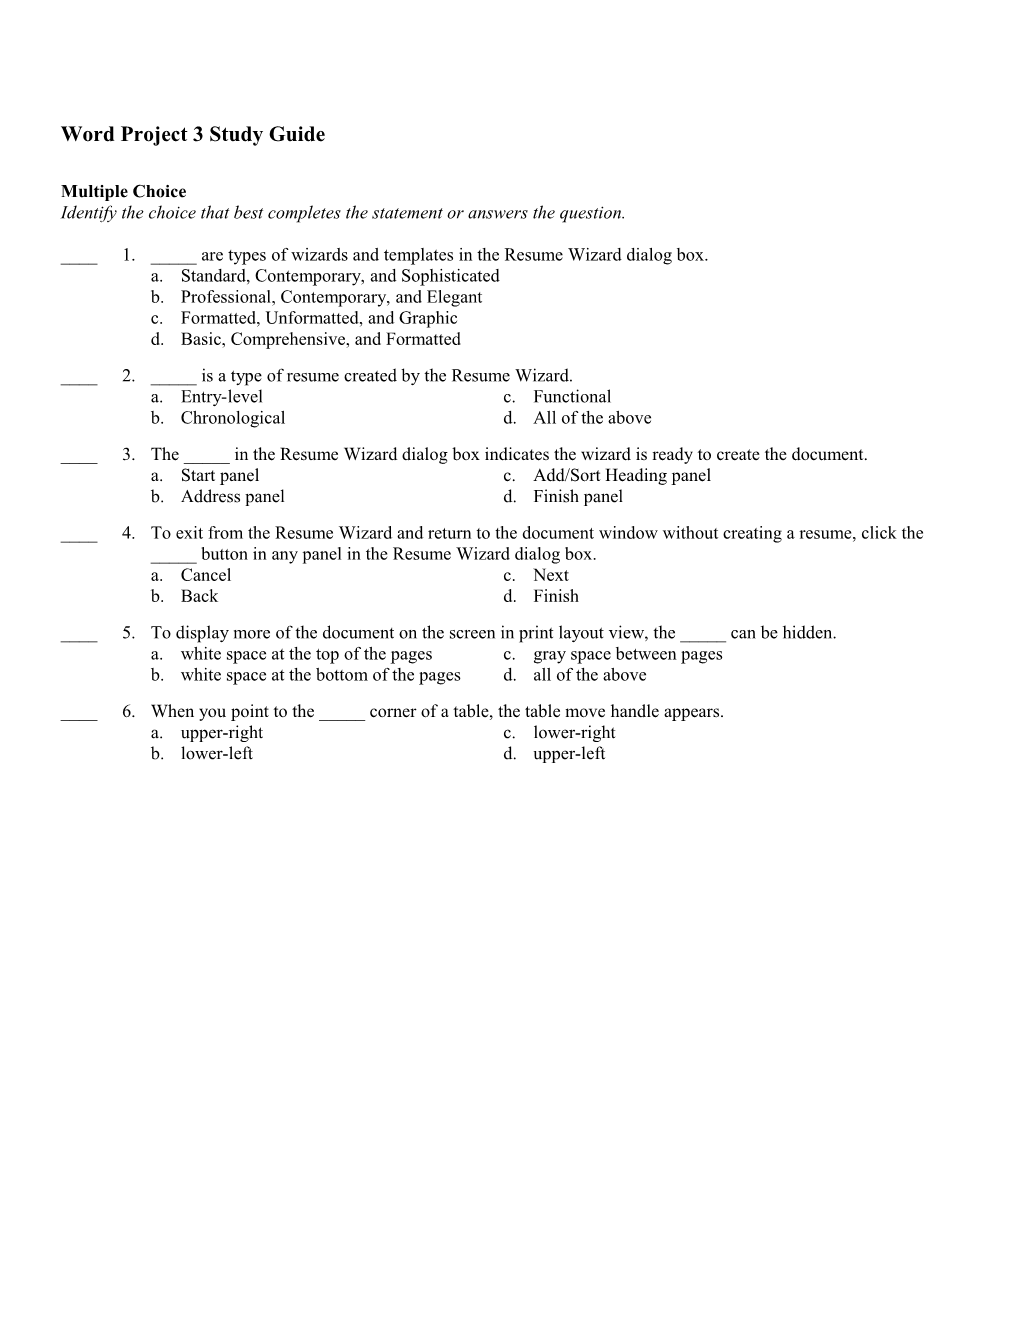 Word Project 3 Study Guide